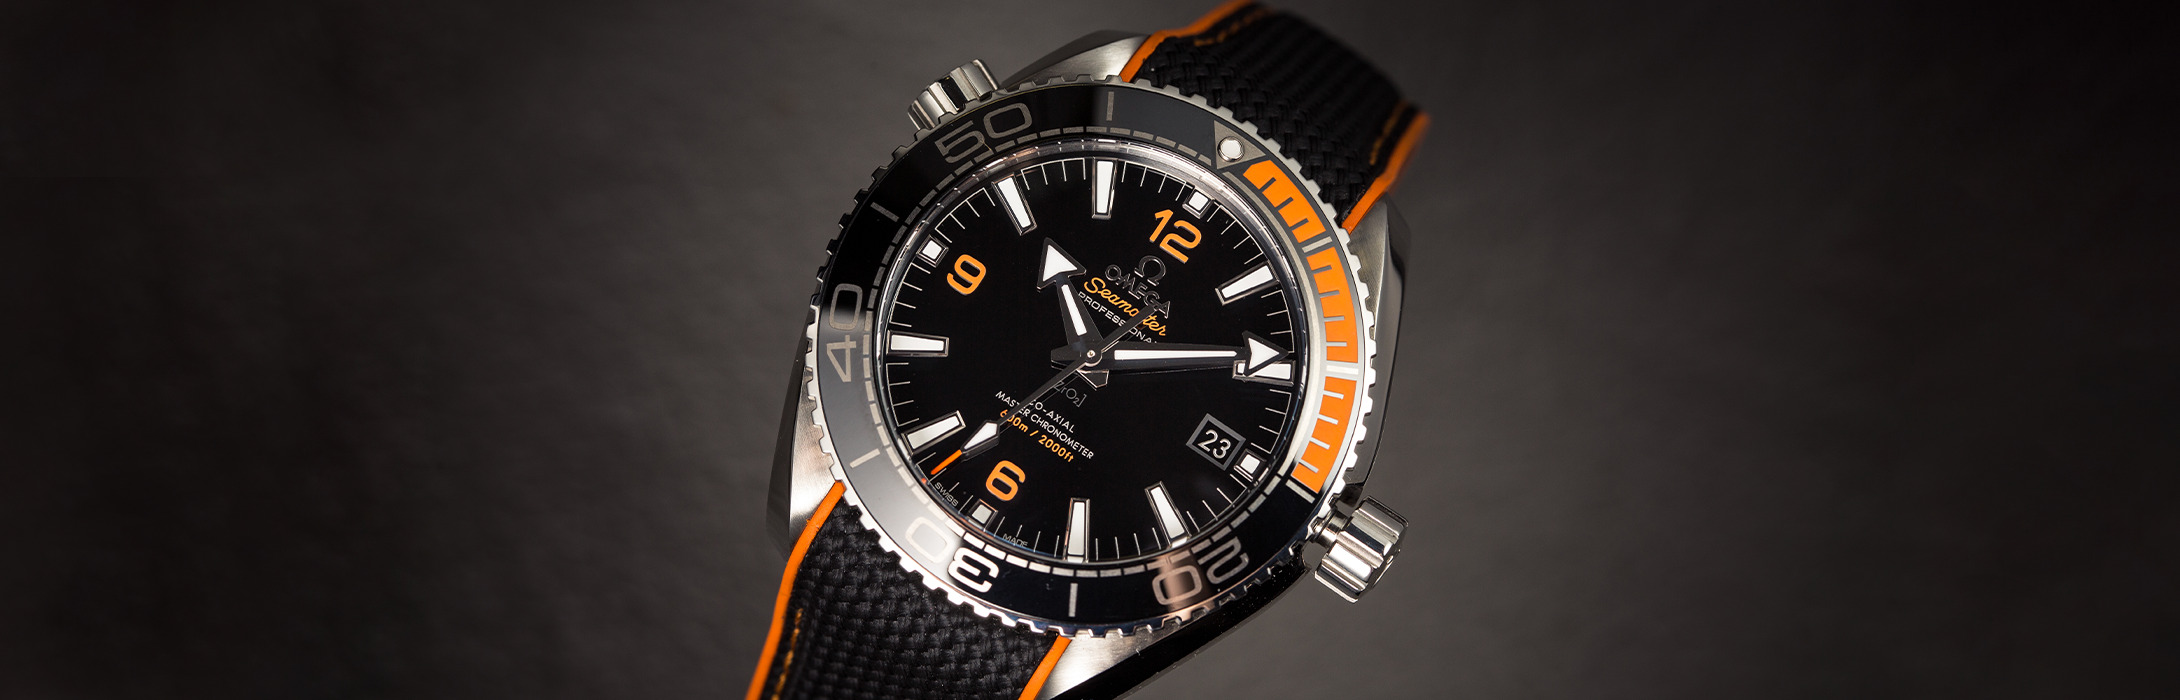 Omega Dive watches buying guide